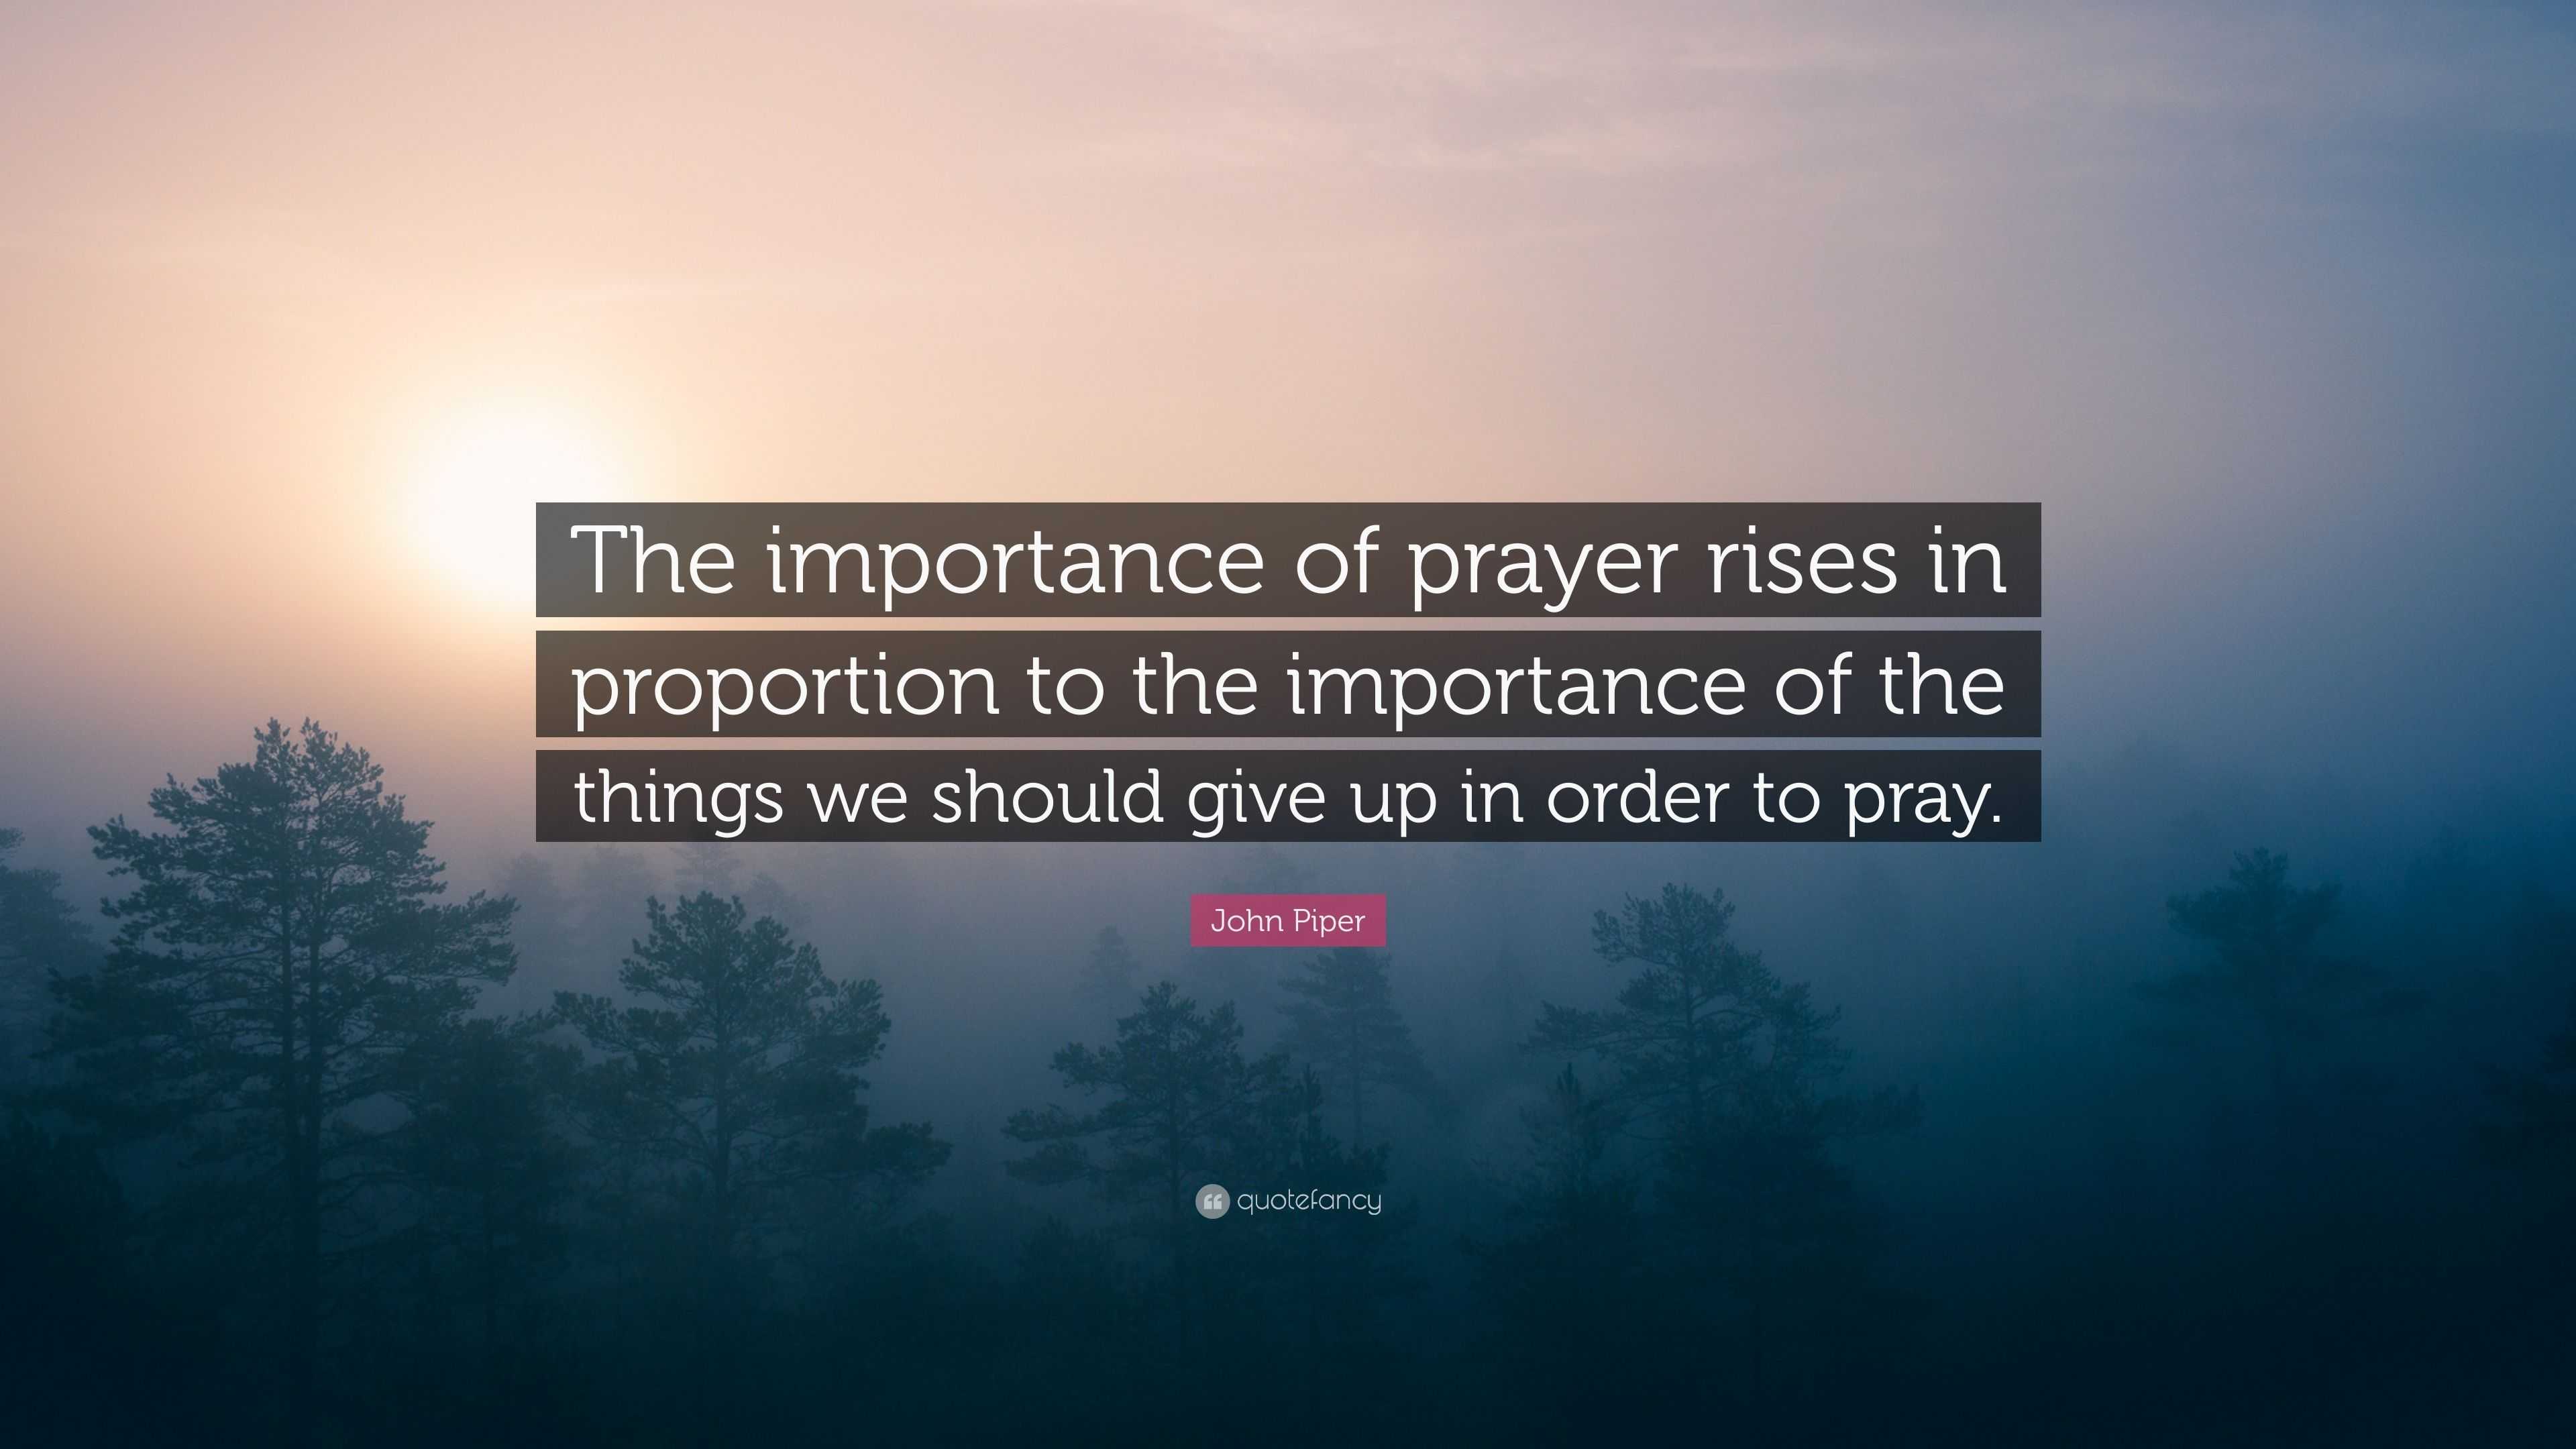 John Piper Quote: “The importance of prayer rises in proportion to the ...